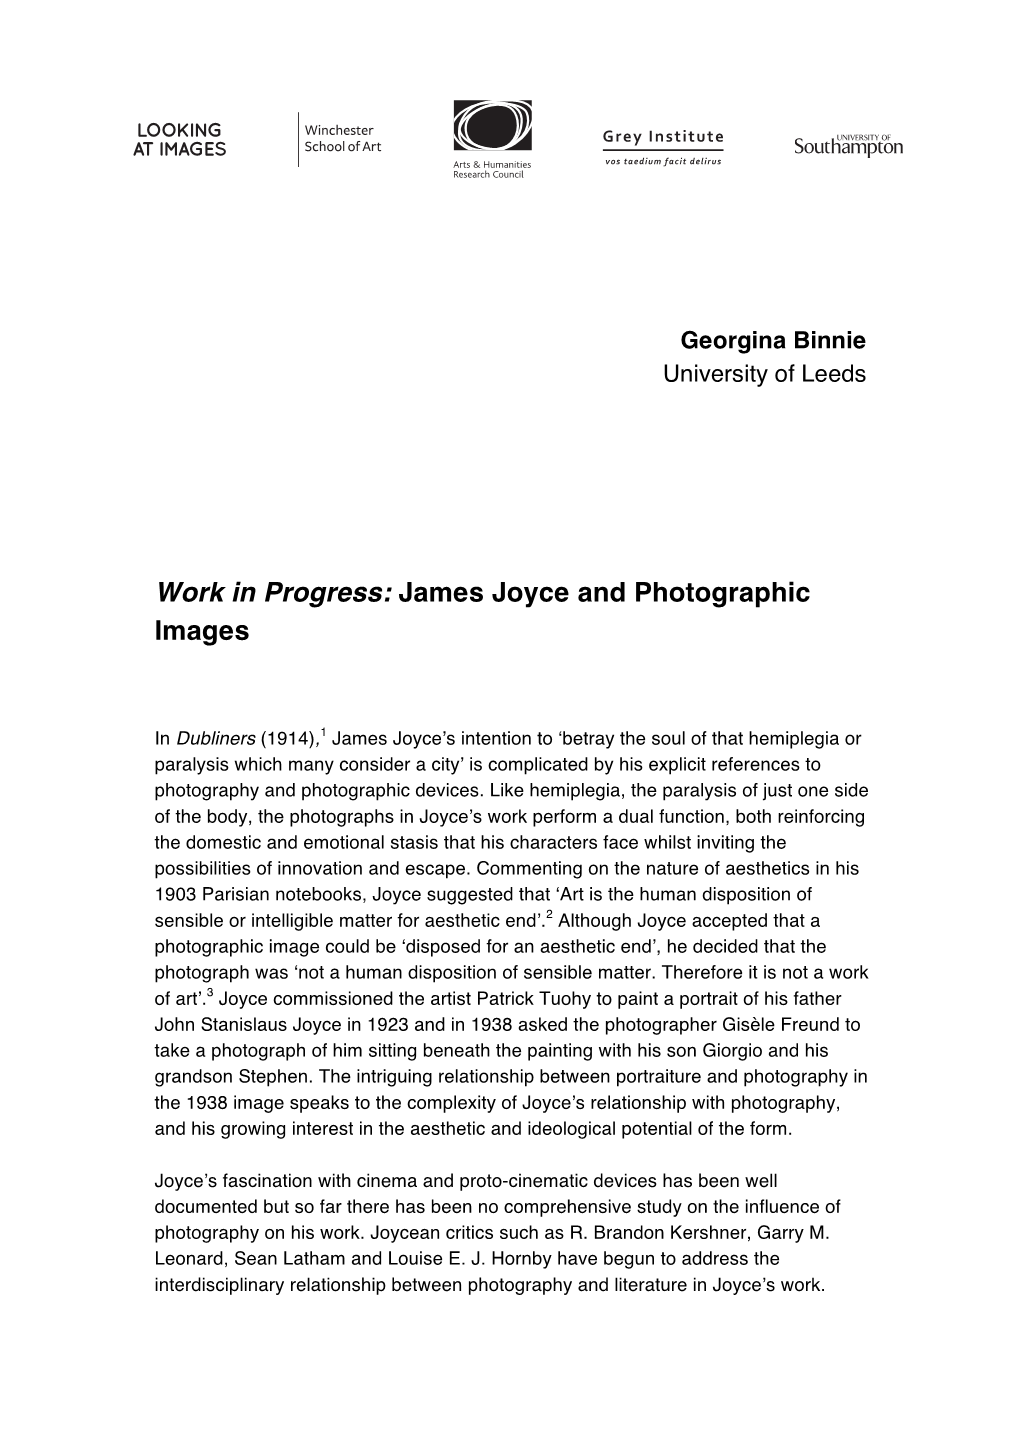 James Joyce and Photographic Images